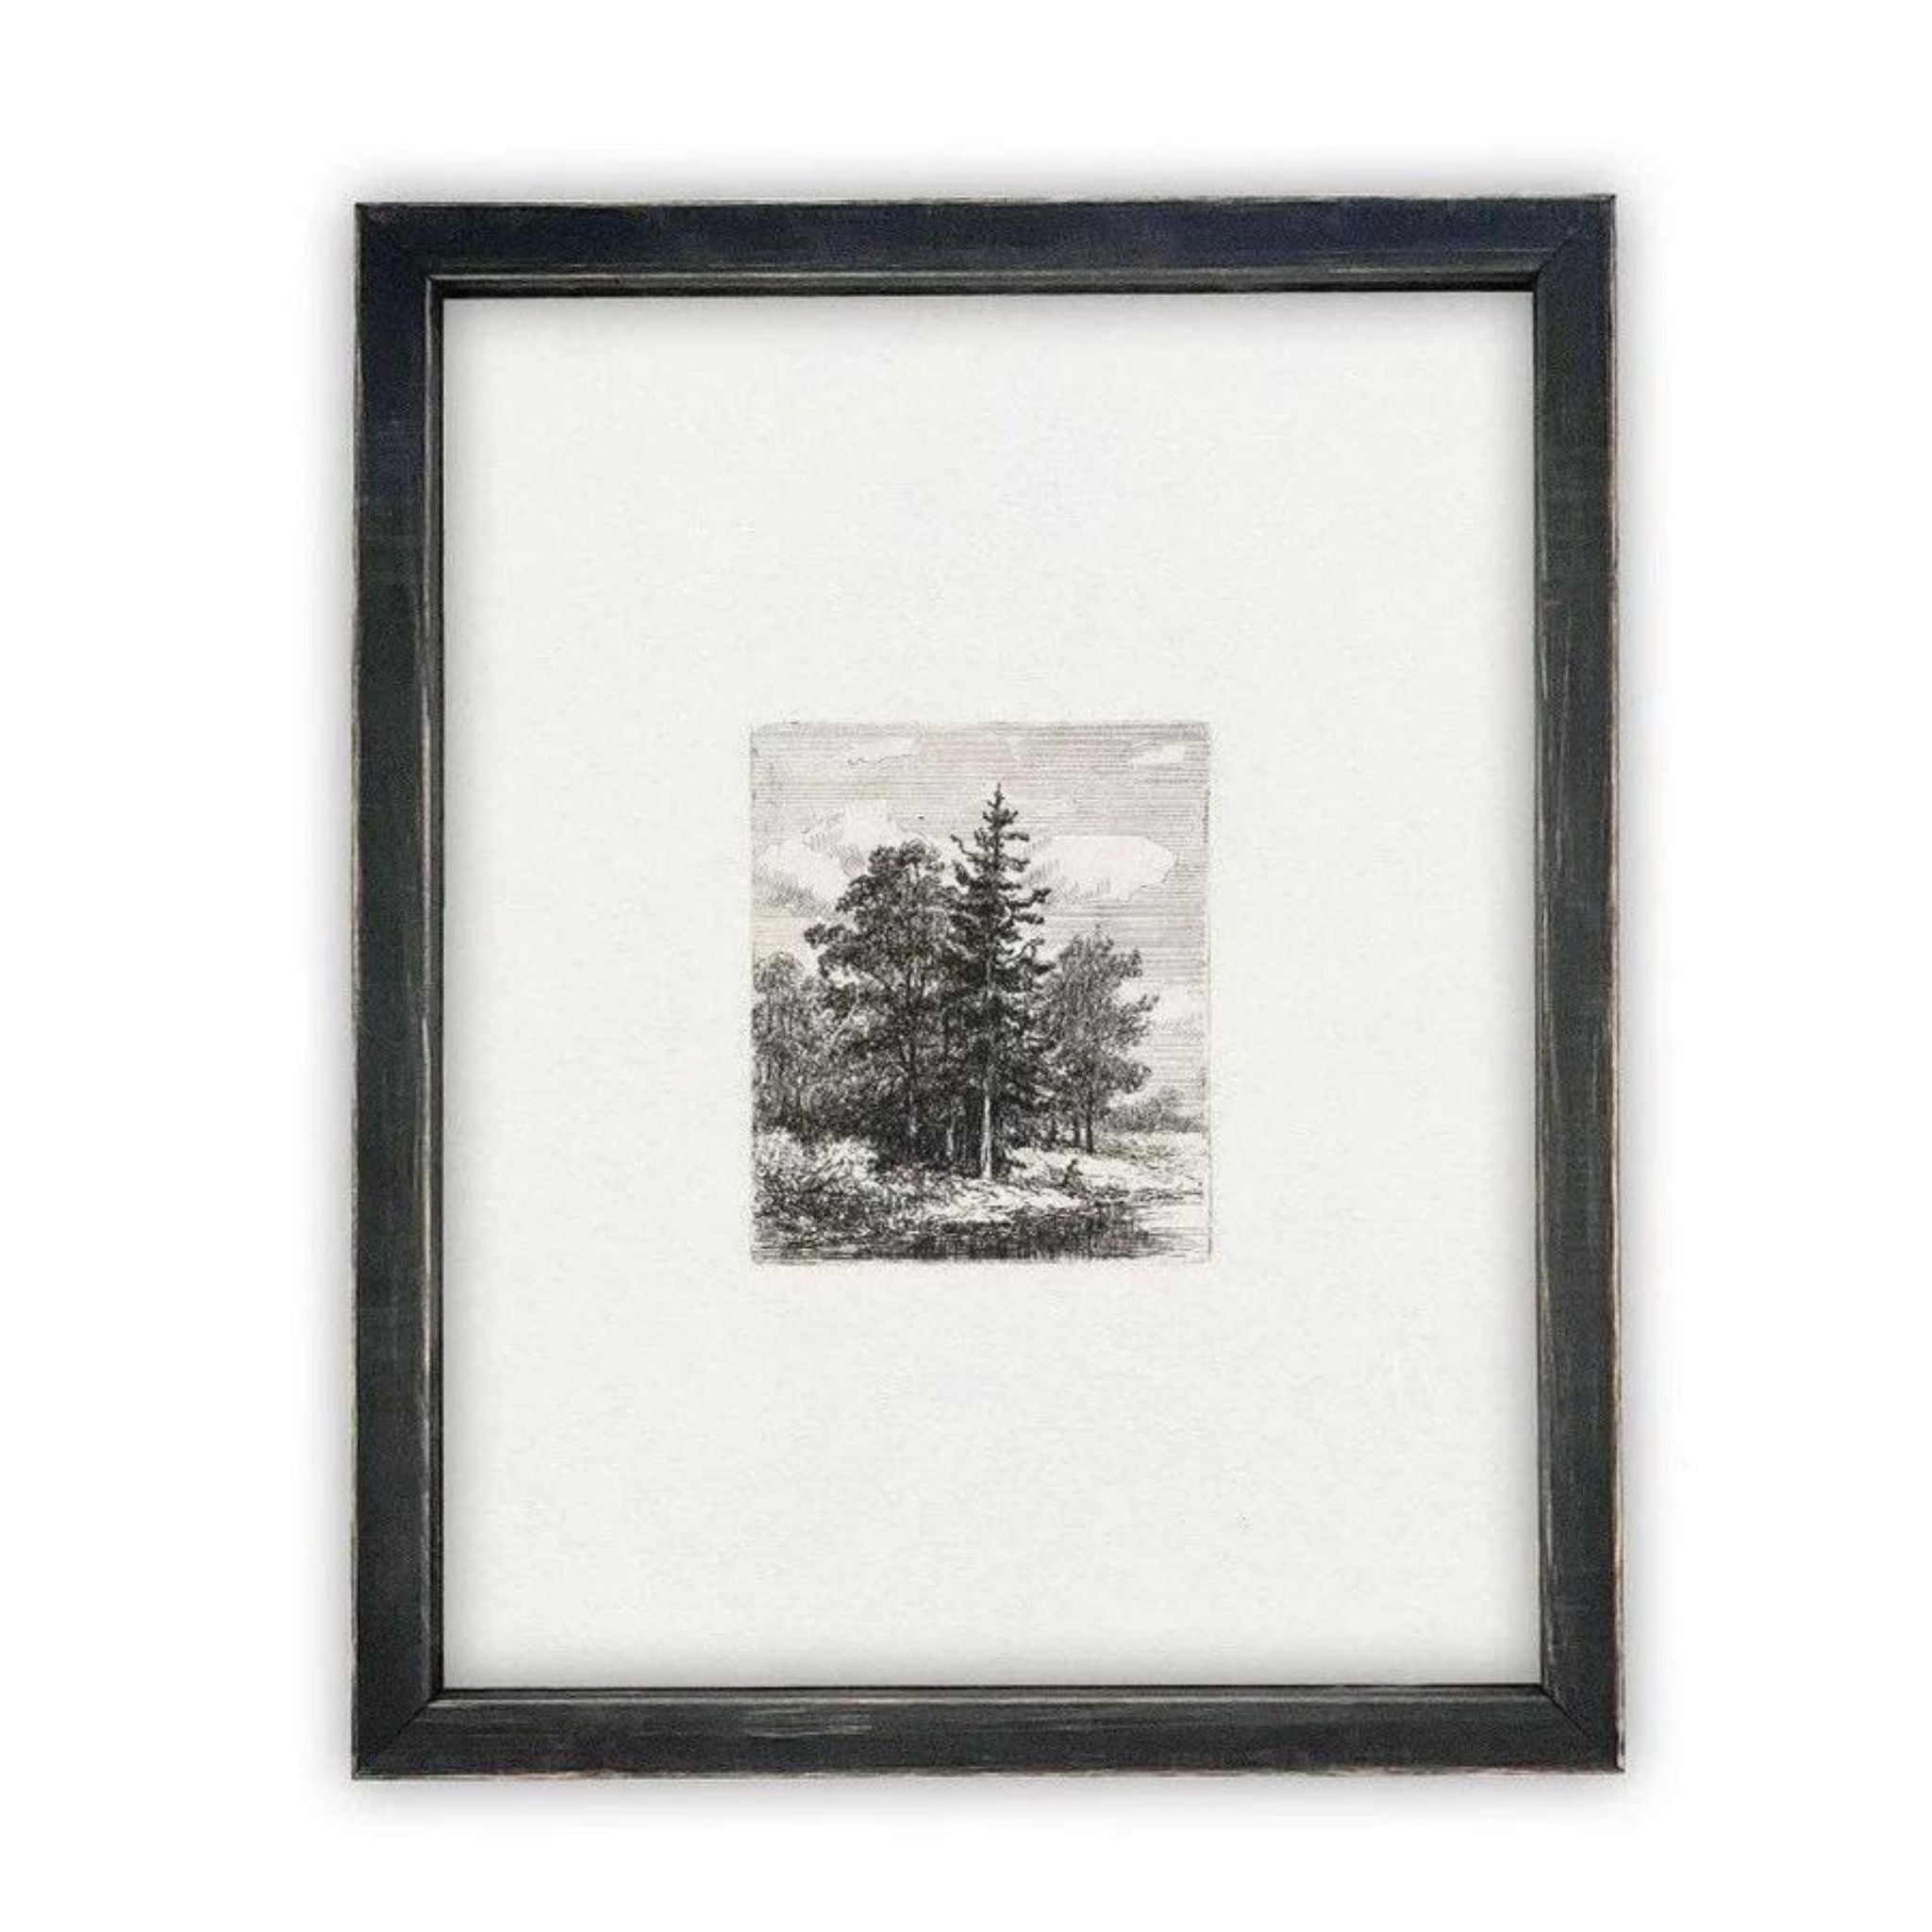 VINTAGE FRAMED CANVAS ART - BLACK & WHITE FOREST - STOW LAKE FRAME - Simply elevated home furnishing 